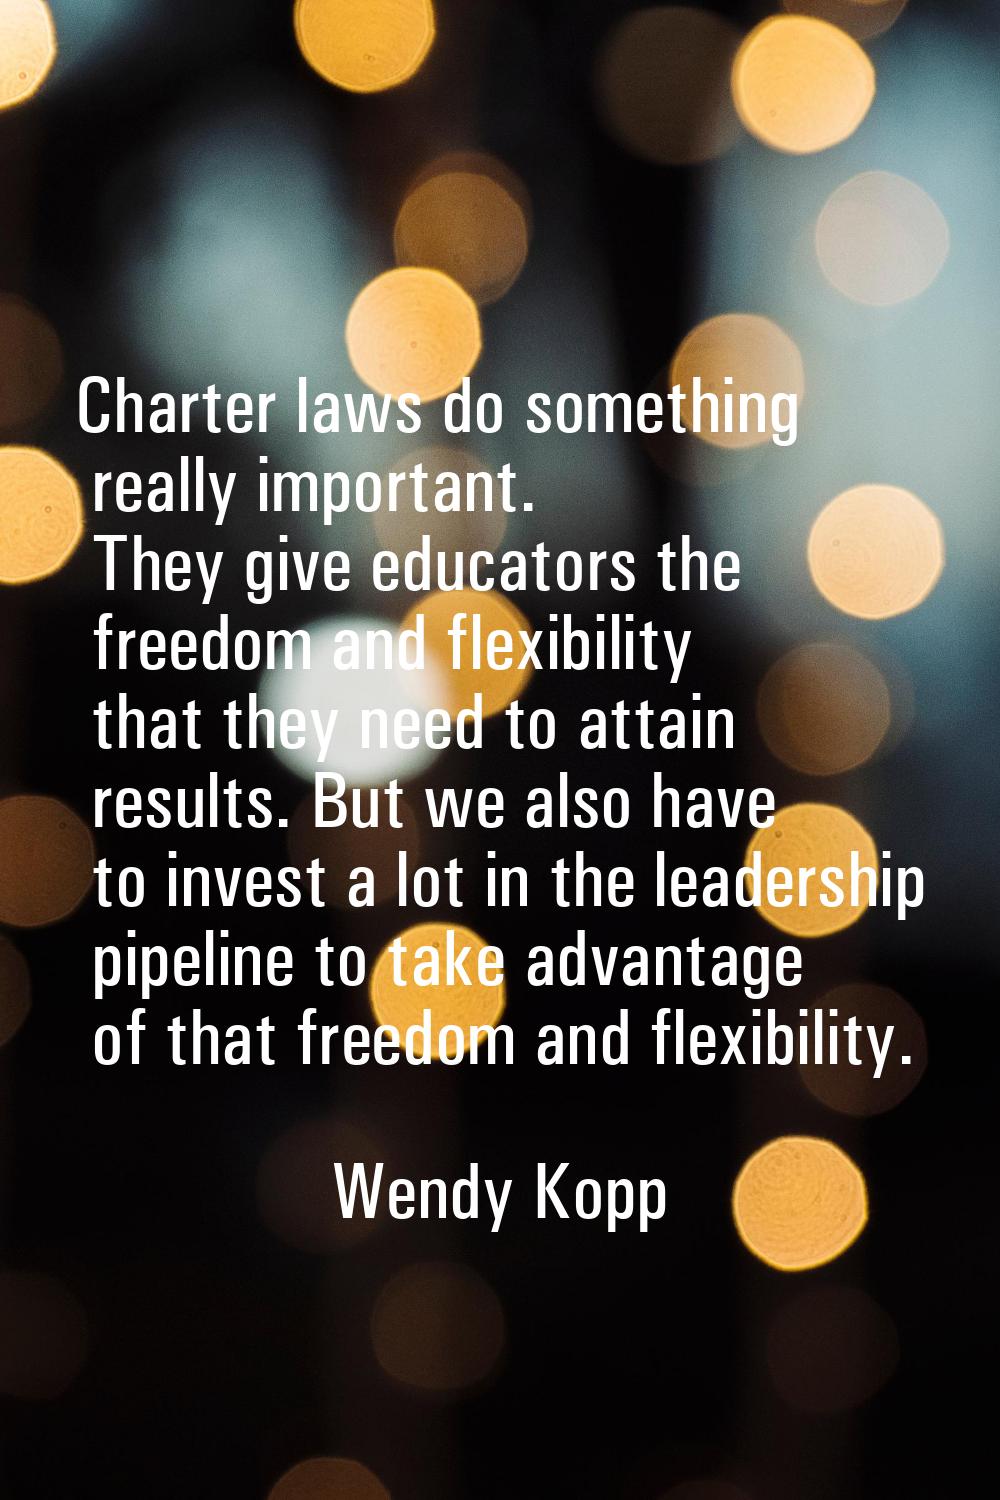 Charter laws do something really important. They give educators the freedom and flexibility that th